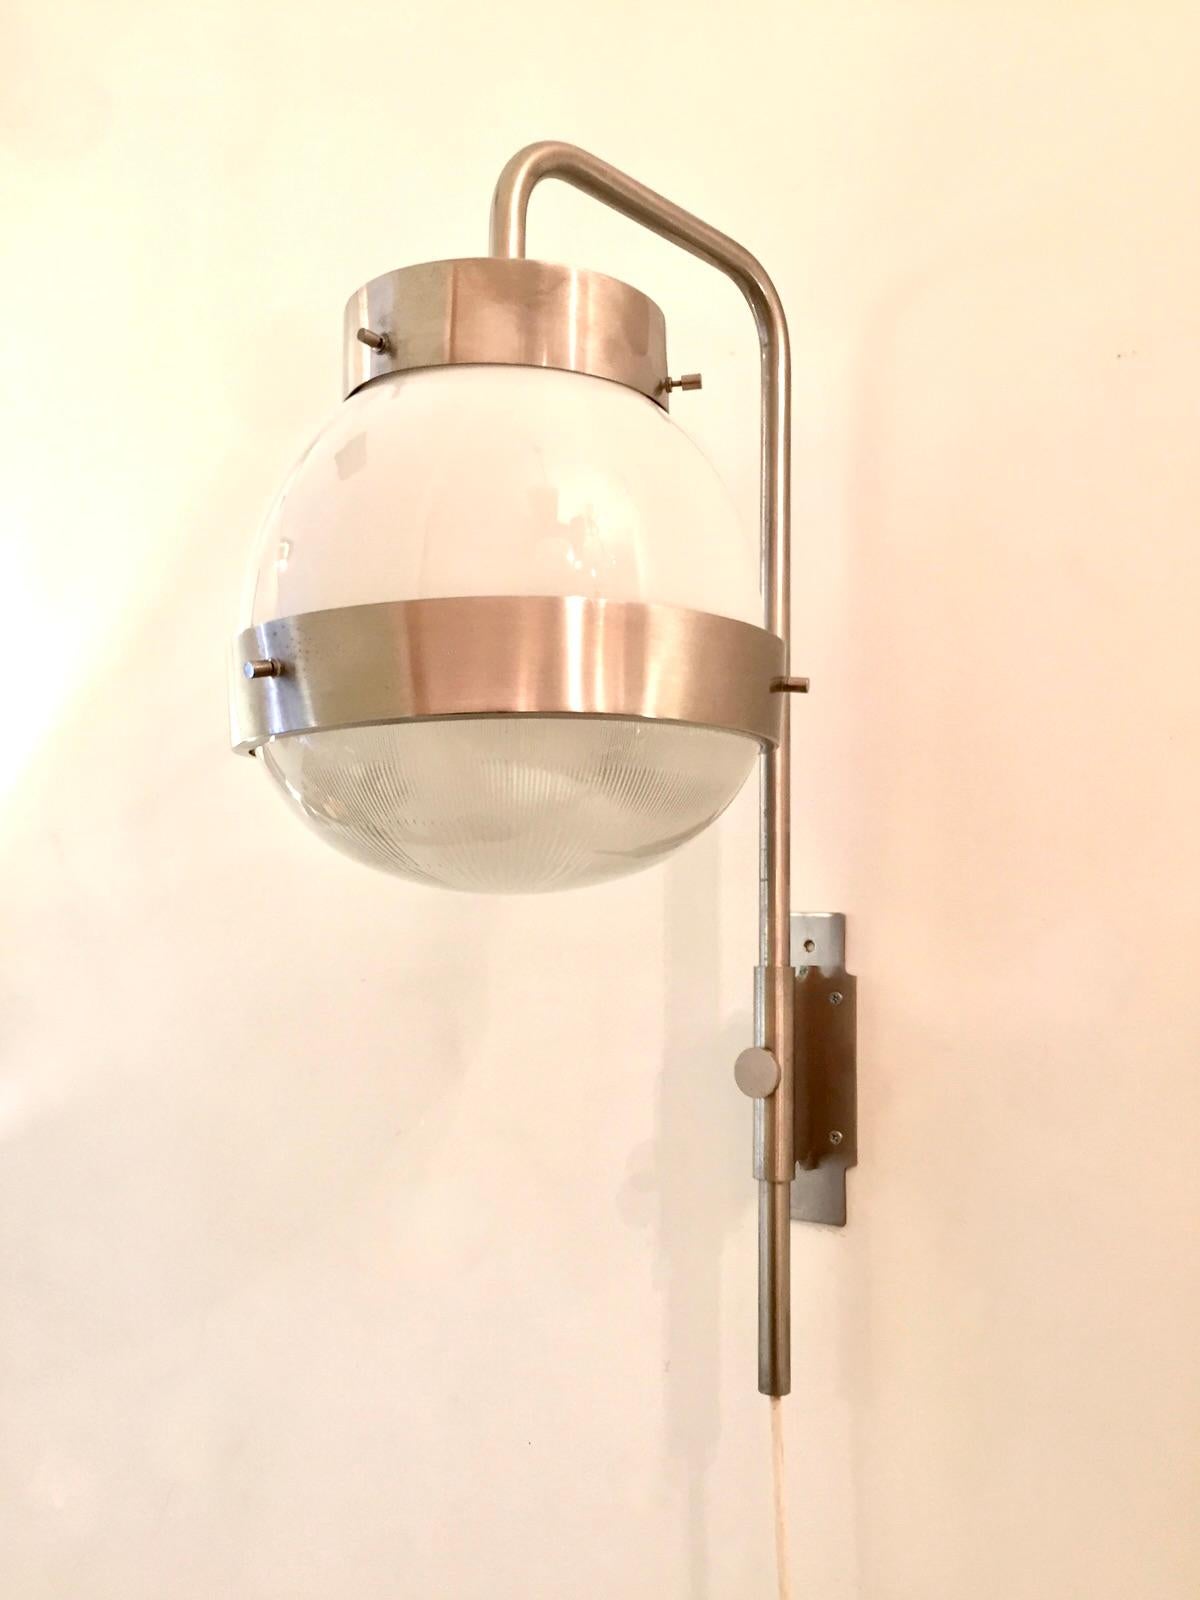 Three outstanding wall lights, designed by Sergio Mazza and edited by Artemide in the 60s. Large Delta model. Nickel plated brass and pressed glass. Very good condition. Rewired.
and adjustable height. Full function.